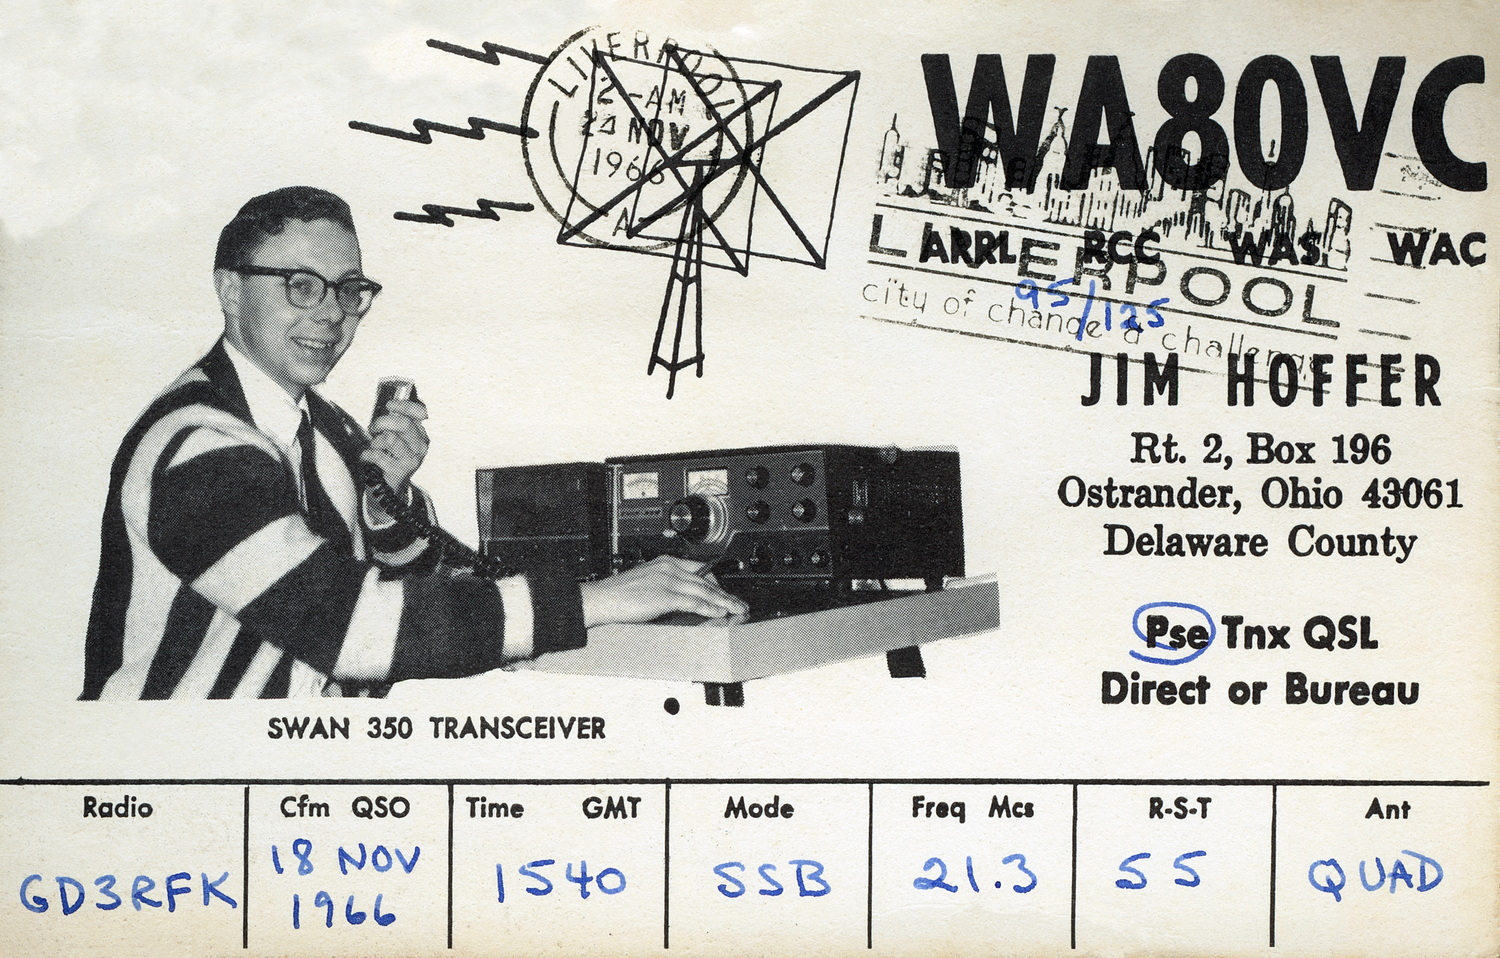 WA80VC (Jim) WSO 18th November 1966 21.3MHz SSB. Operating a Beautiful Swan 350 on what seemed very common back in the 1960's, QUAD Antenna.